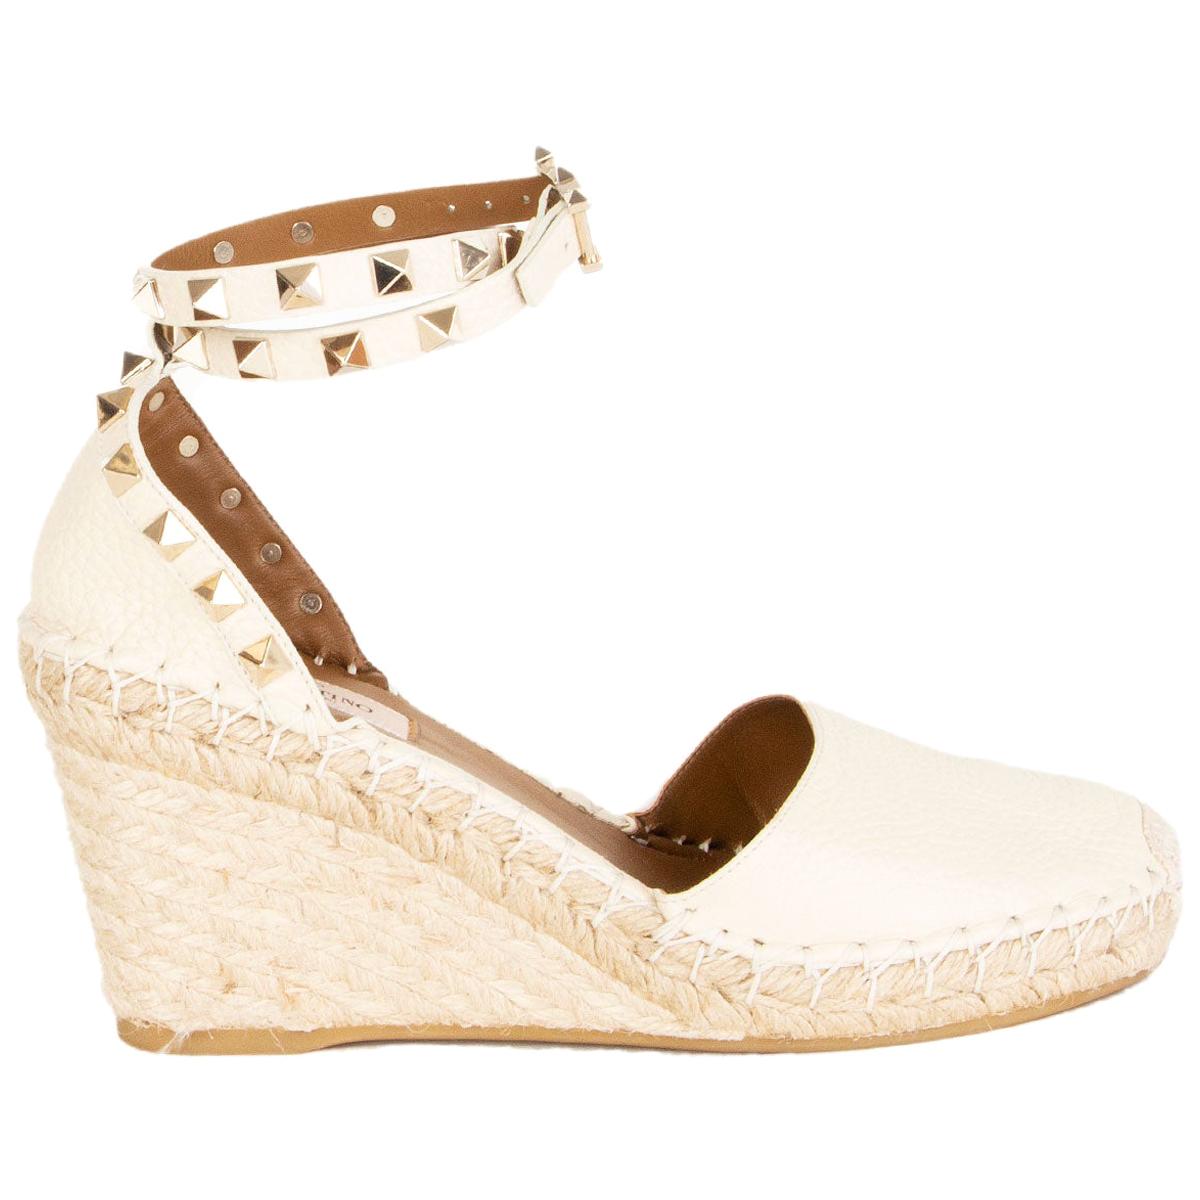 VALENTINO cream white leather ROCKSTUD Wedge Sandals Shoes 36